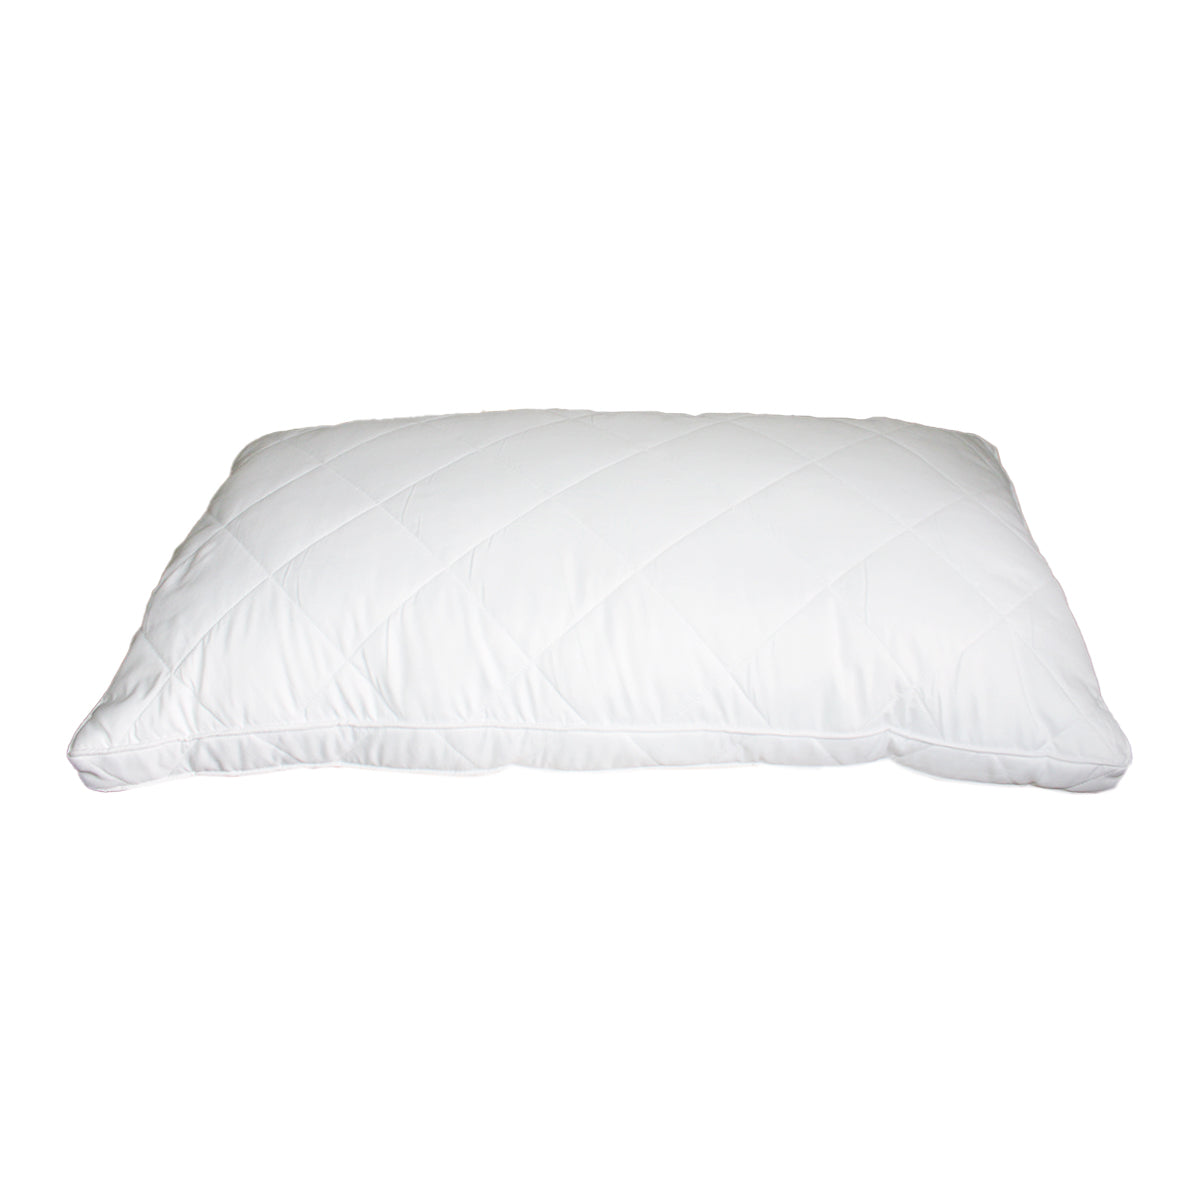 KING SIZE PADDED PILLOW WITH BELLOWS AND CORD 9667 